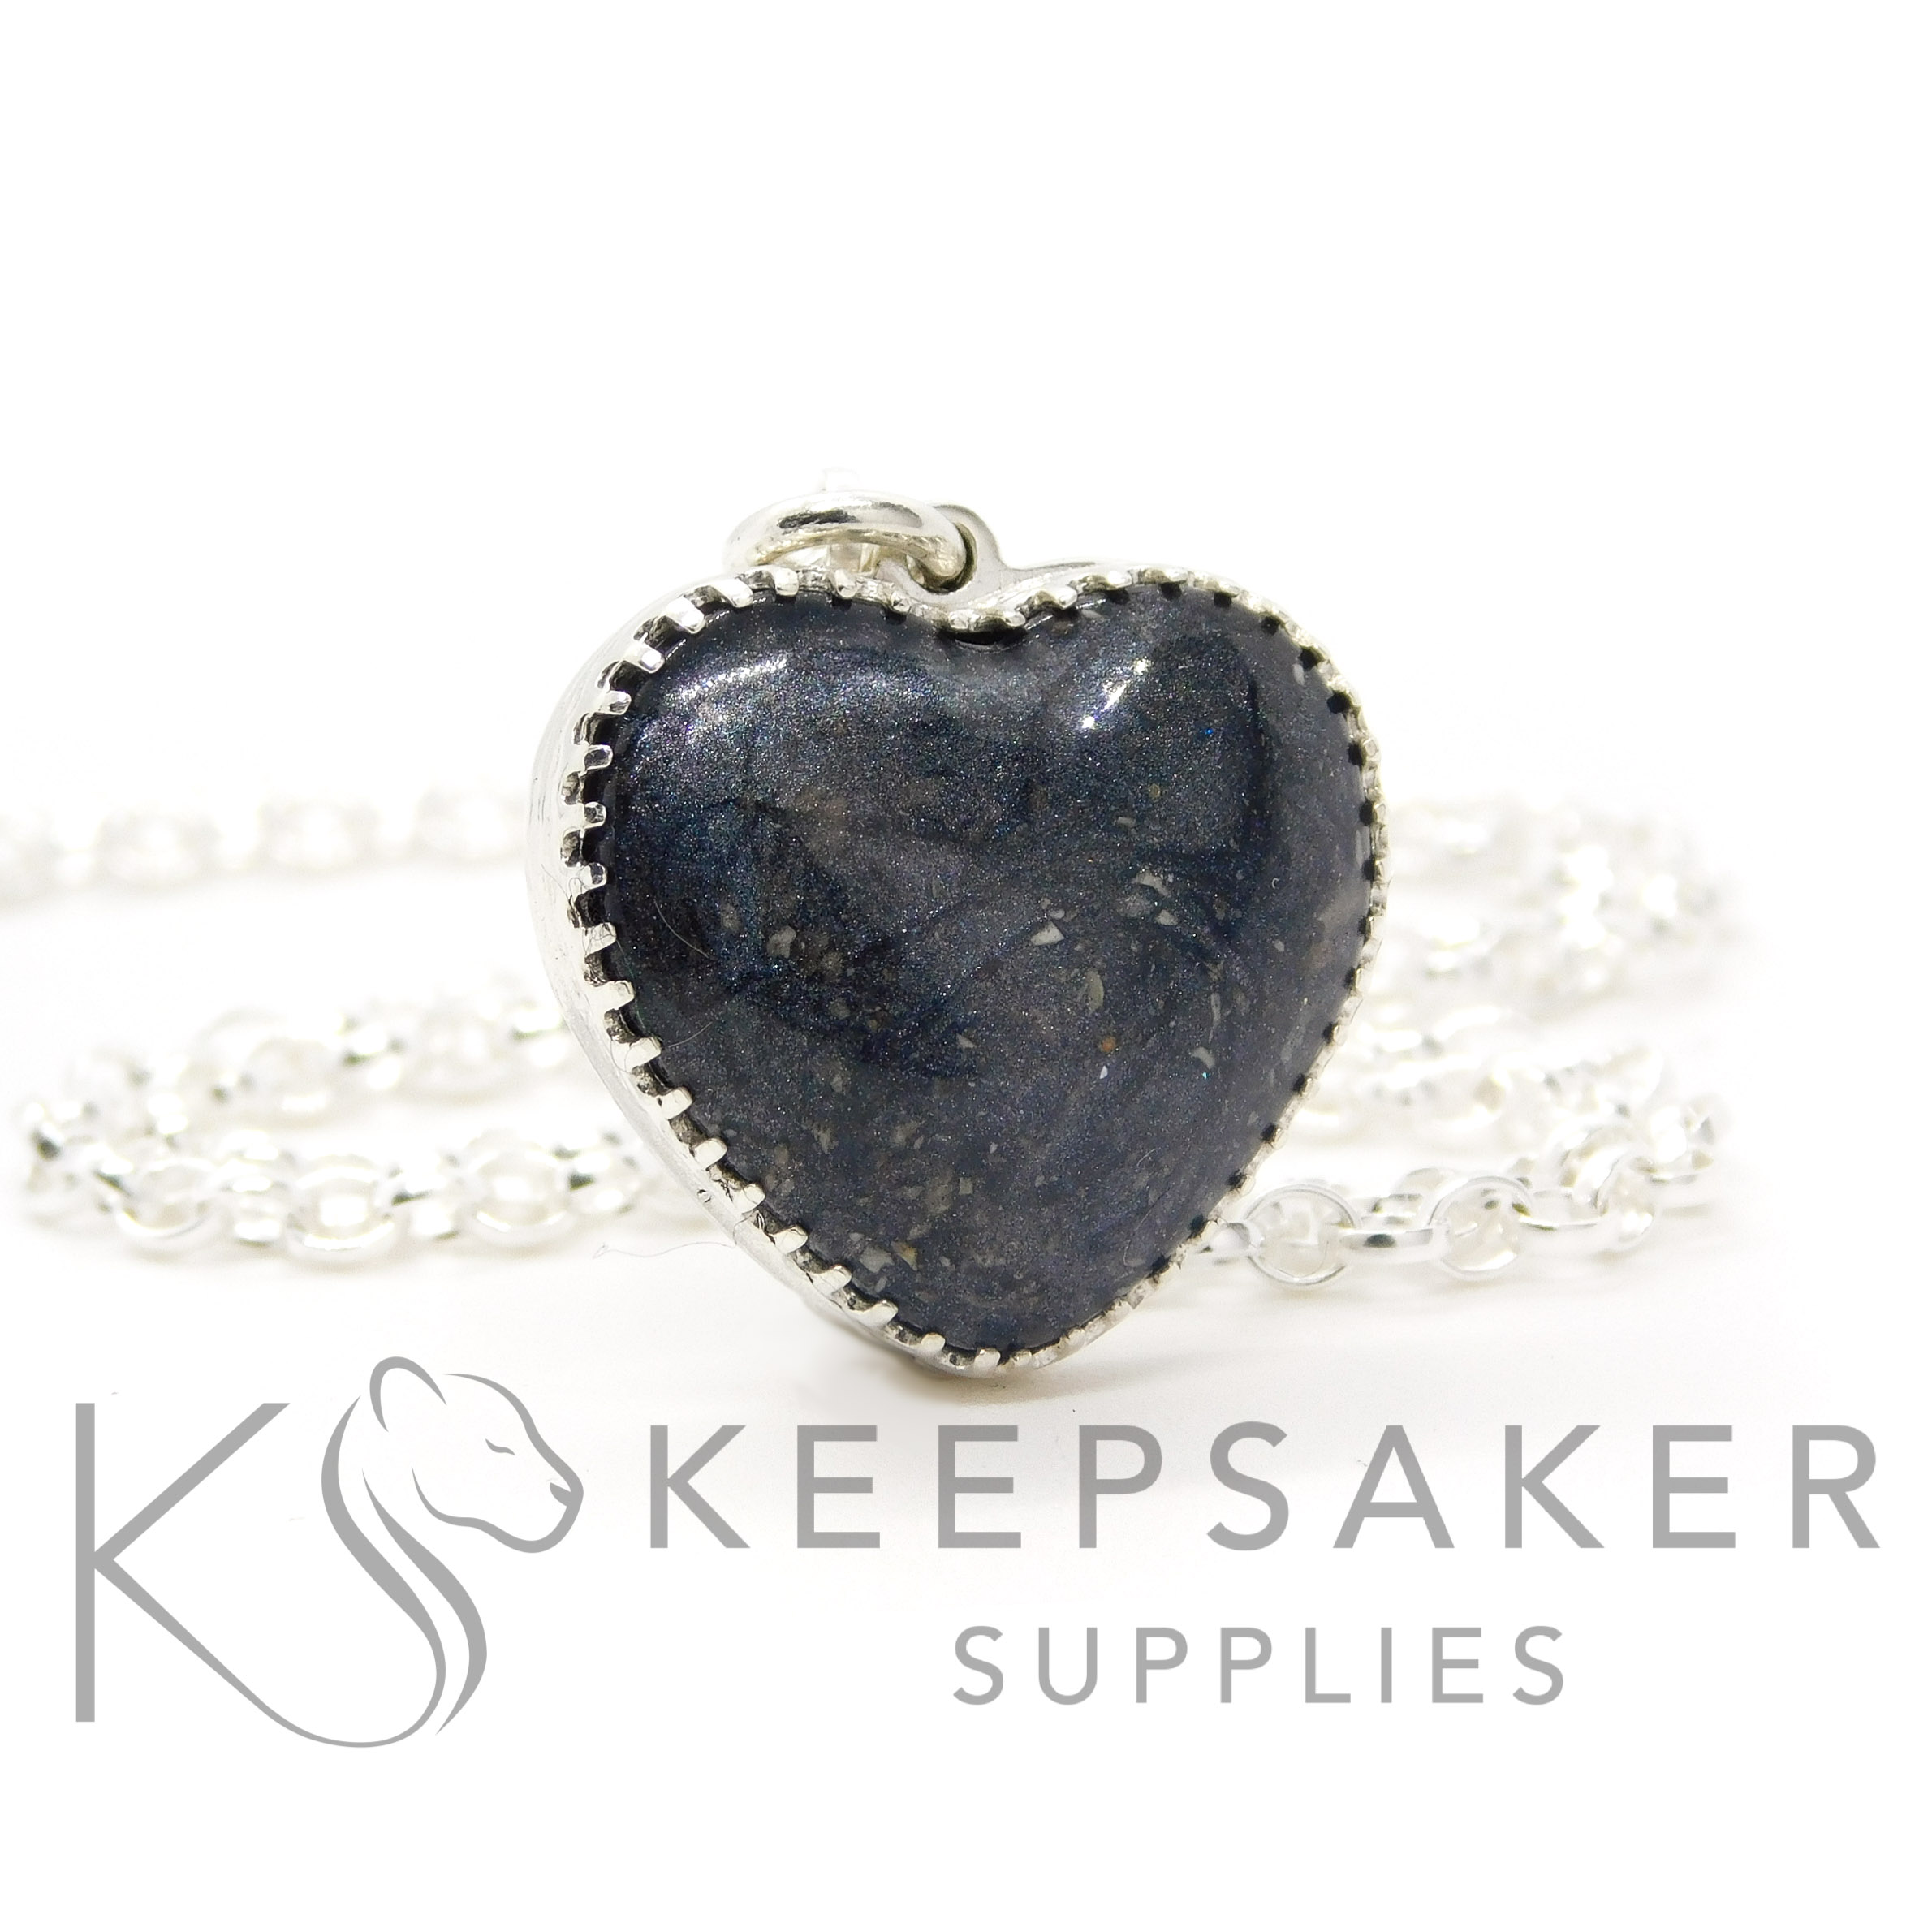 New style heart necklace setting with scalloped edge. Vampire black resin sparkle mix, shown with a medium classic chain upgrade